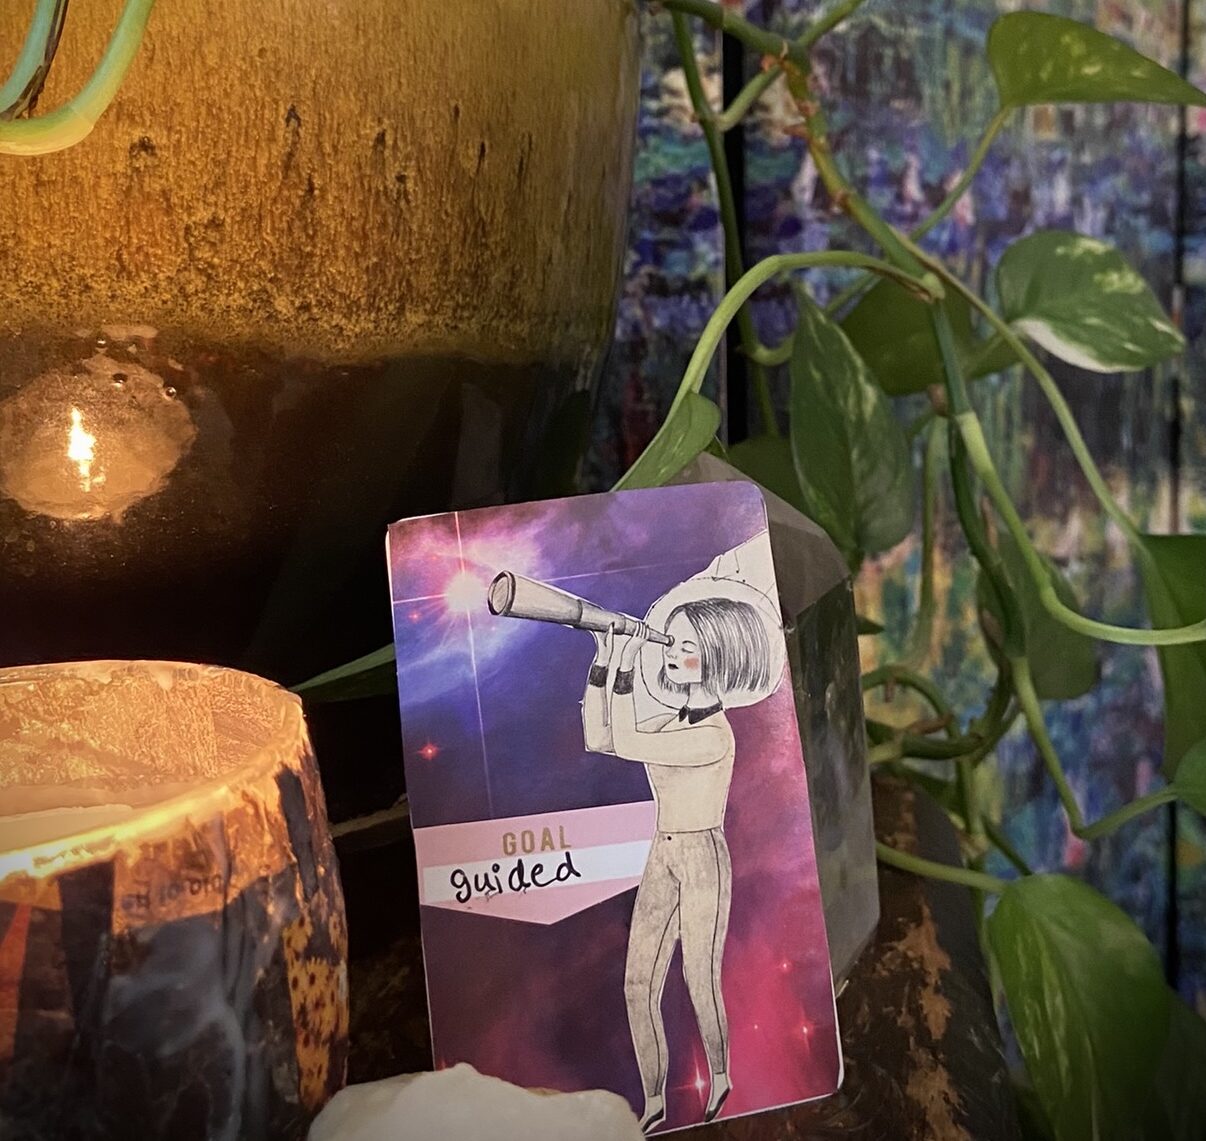 candle and plant surrounds an artist trading card with collage of girl with monocular looking for fulfillment